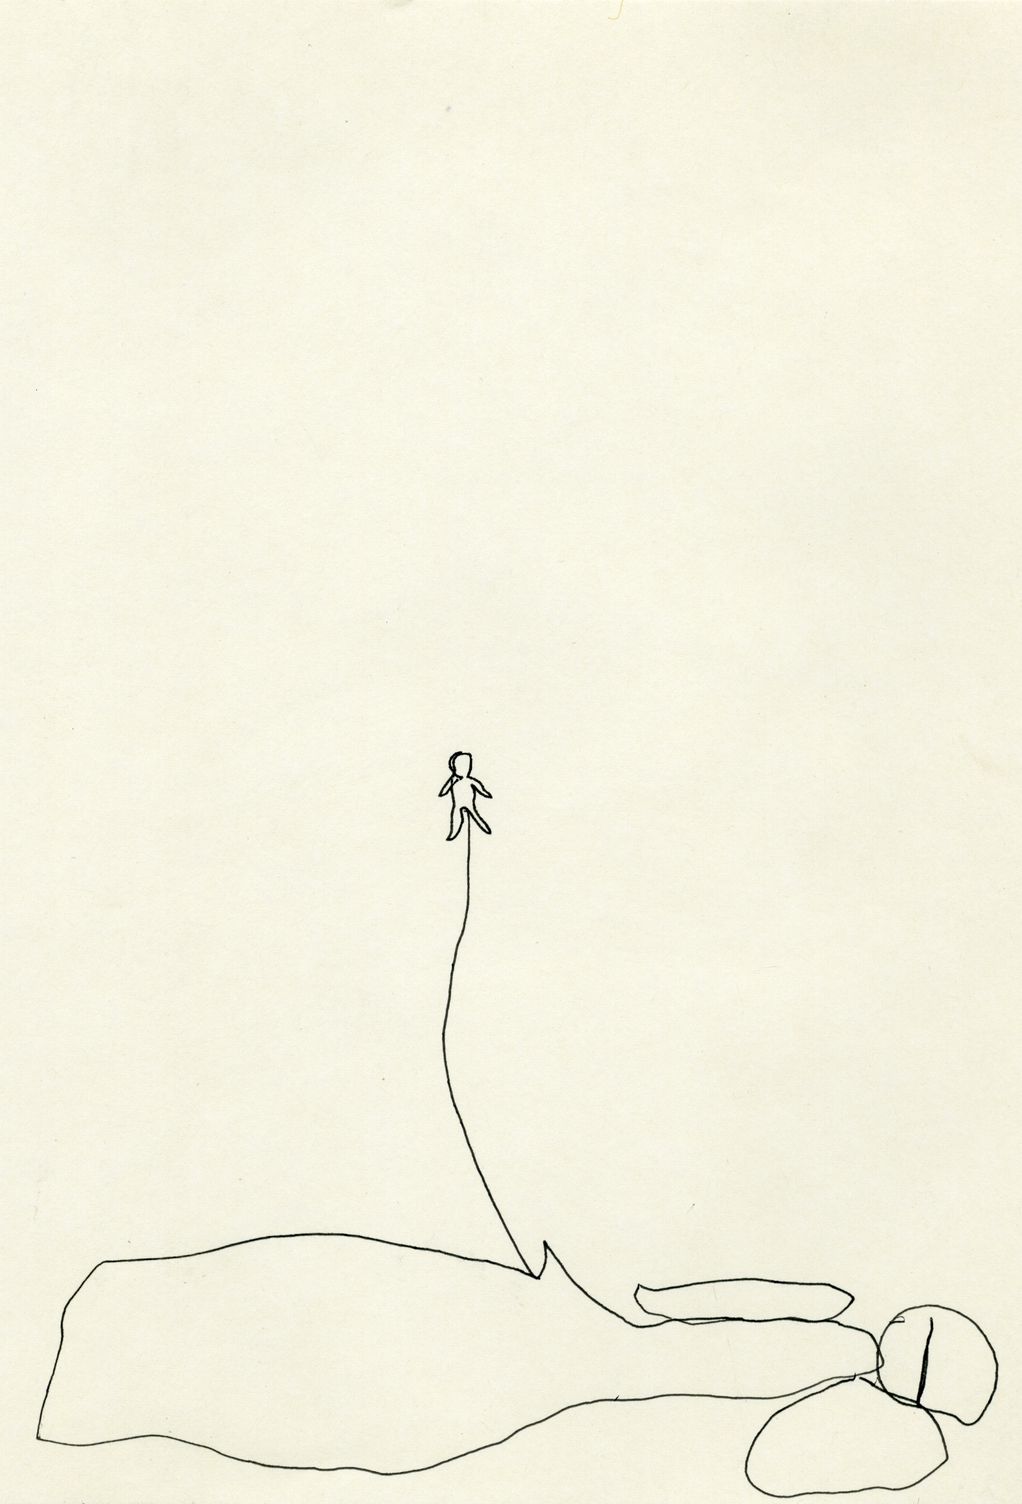 Sleep (2006), Work on Paper by Claudia Hill